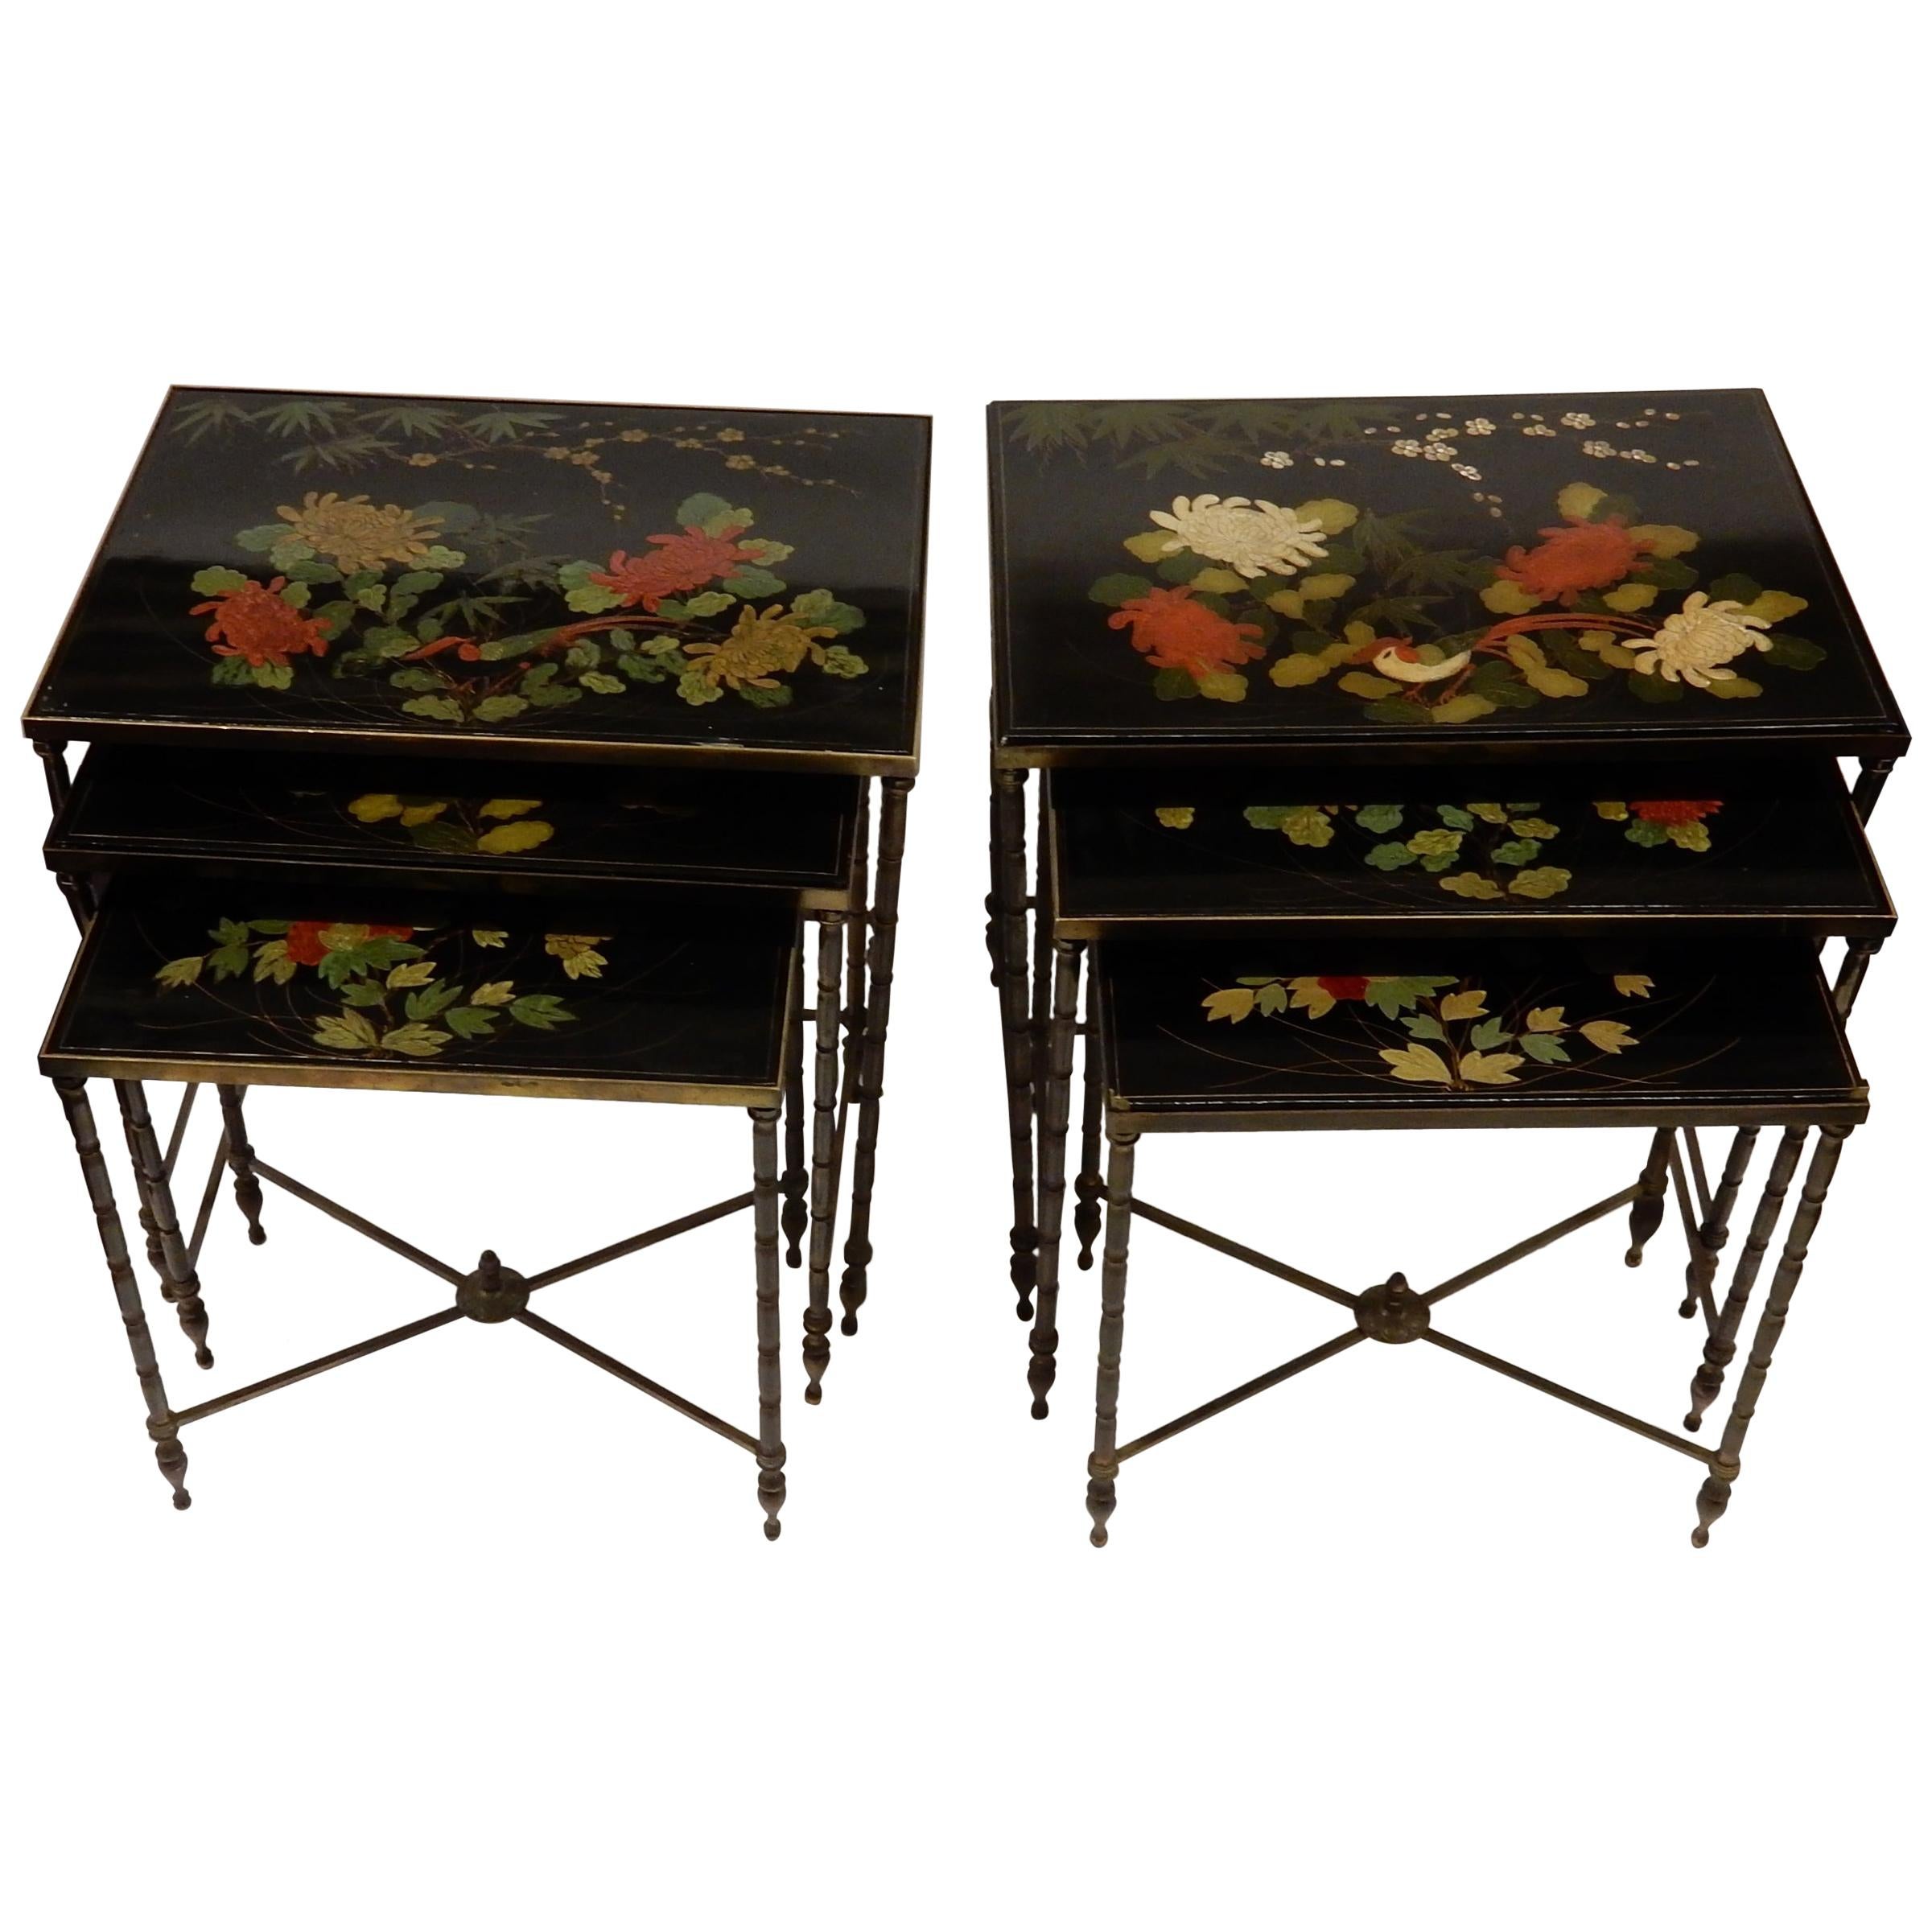 1950-1970 Pair of Series of 3 Nesting Tables